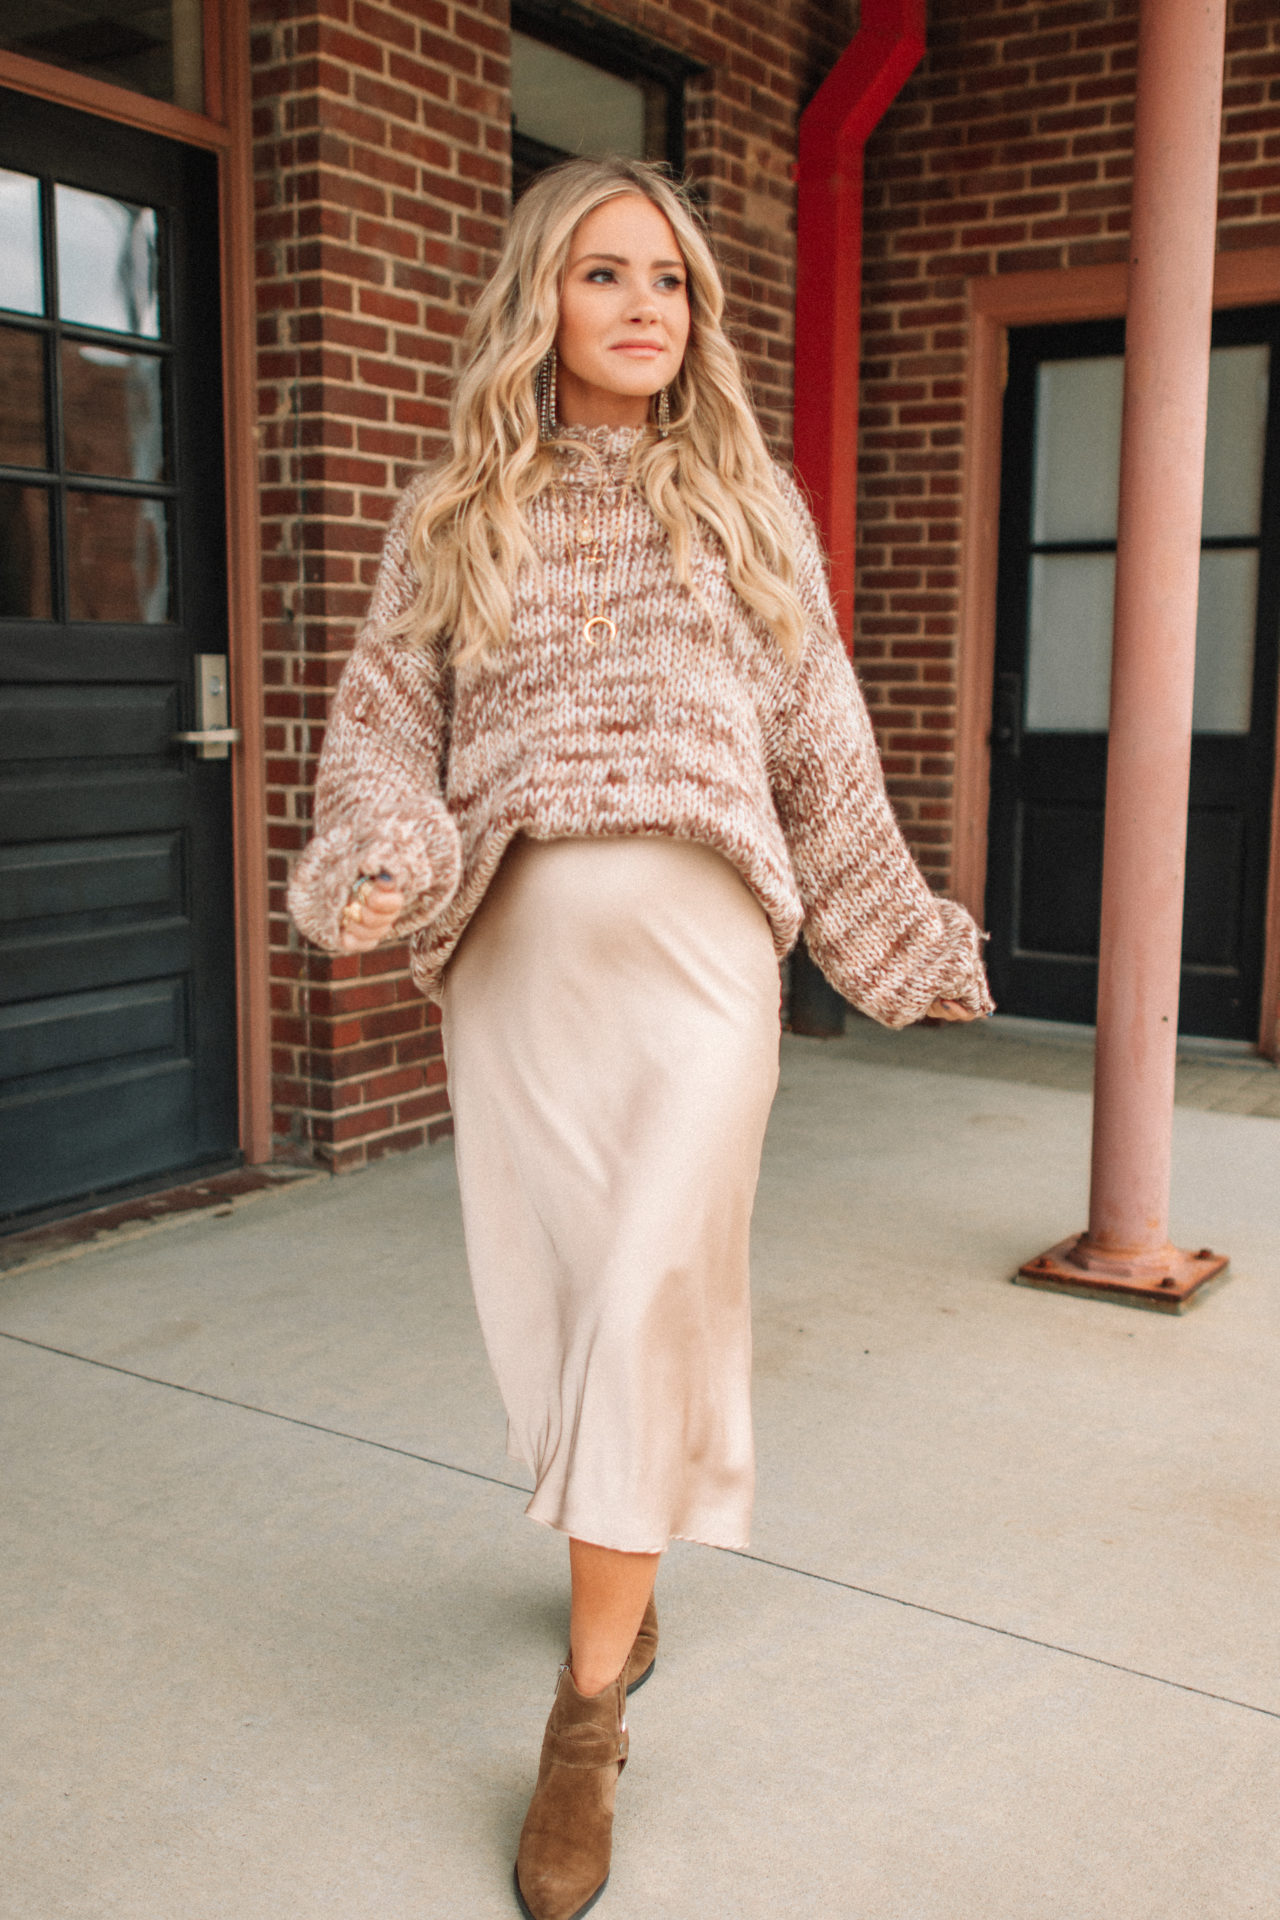 How to Style a Knit Skirt